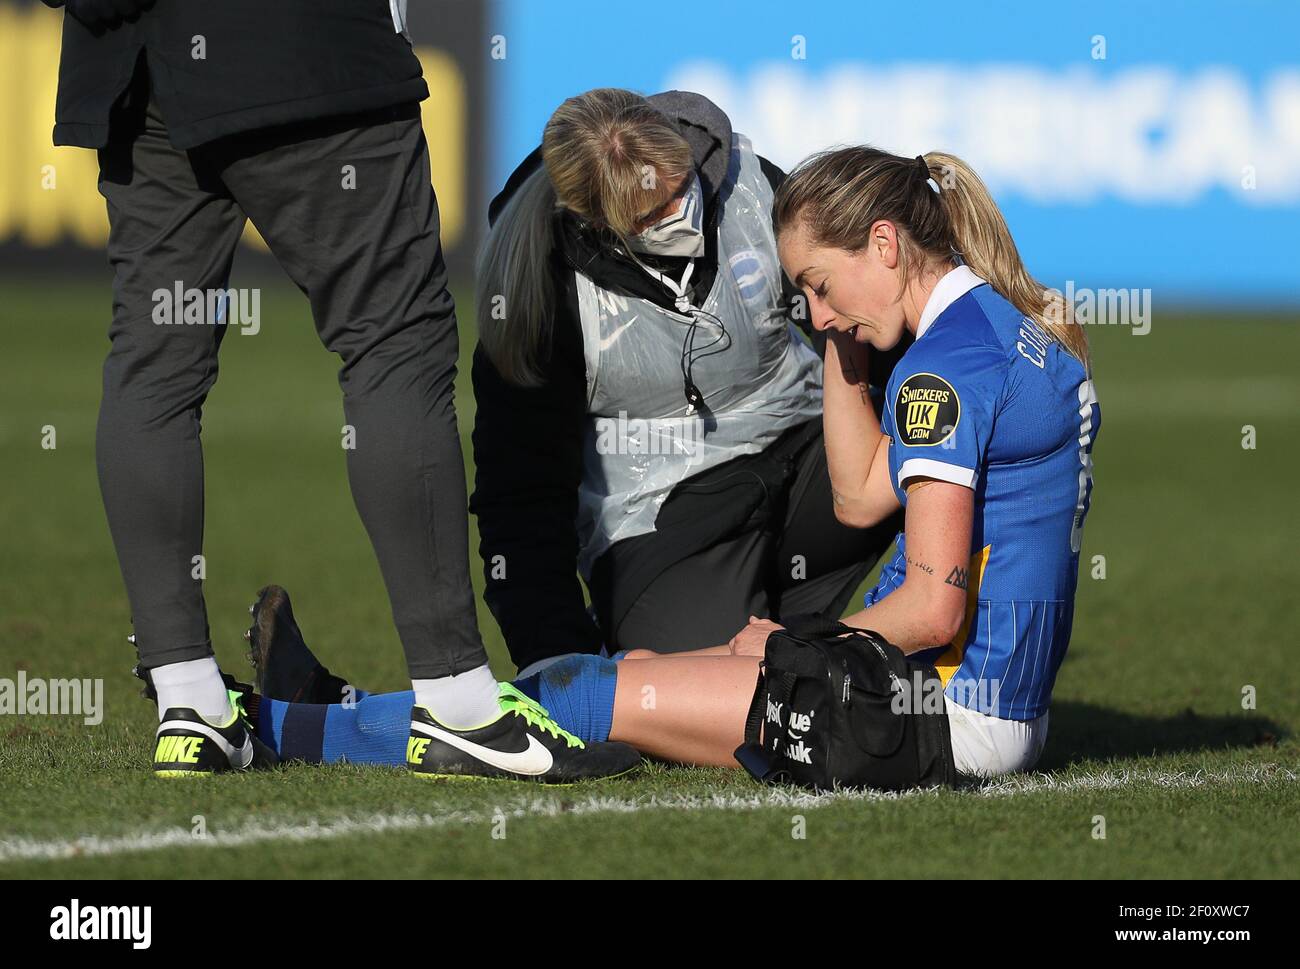 Crawley, UK. 7th March 2021. Megan Connolly of Brighton Receives medical attention during the FA Women's Super League match between Brighton & Hove Albion Women and Tottenham Hotspur Women at The People's Pension Stadium on March 7th 2021 in Crawley, United Kingdom Stock Photo